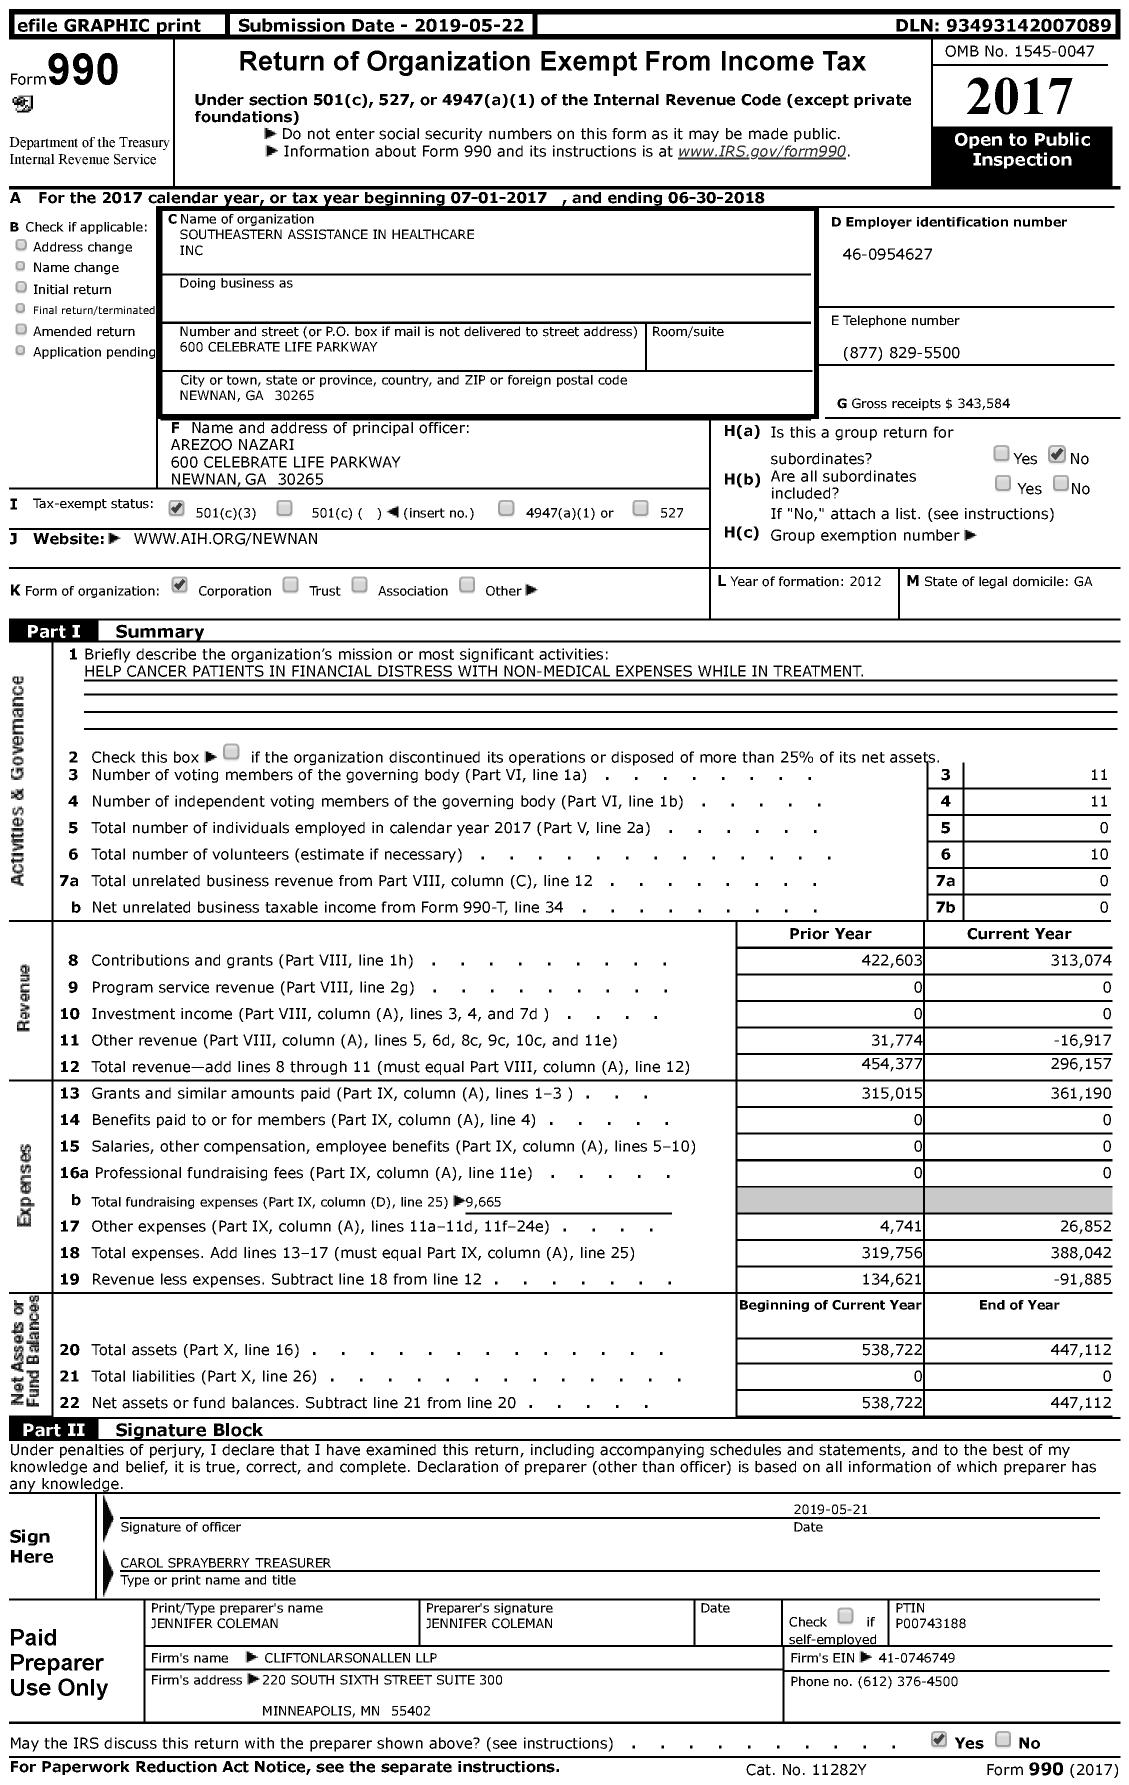 Image of first page of 2017 Form 990 for Southeastern Assistance in Healthcare